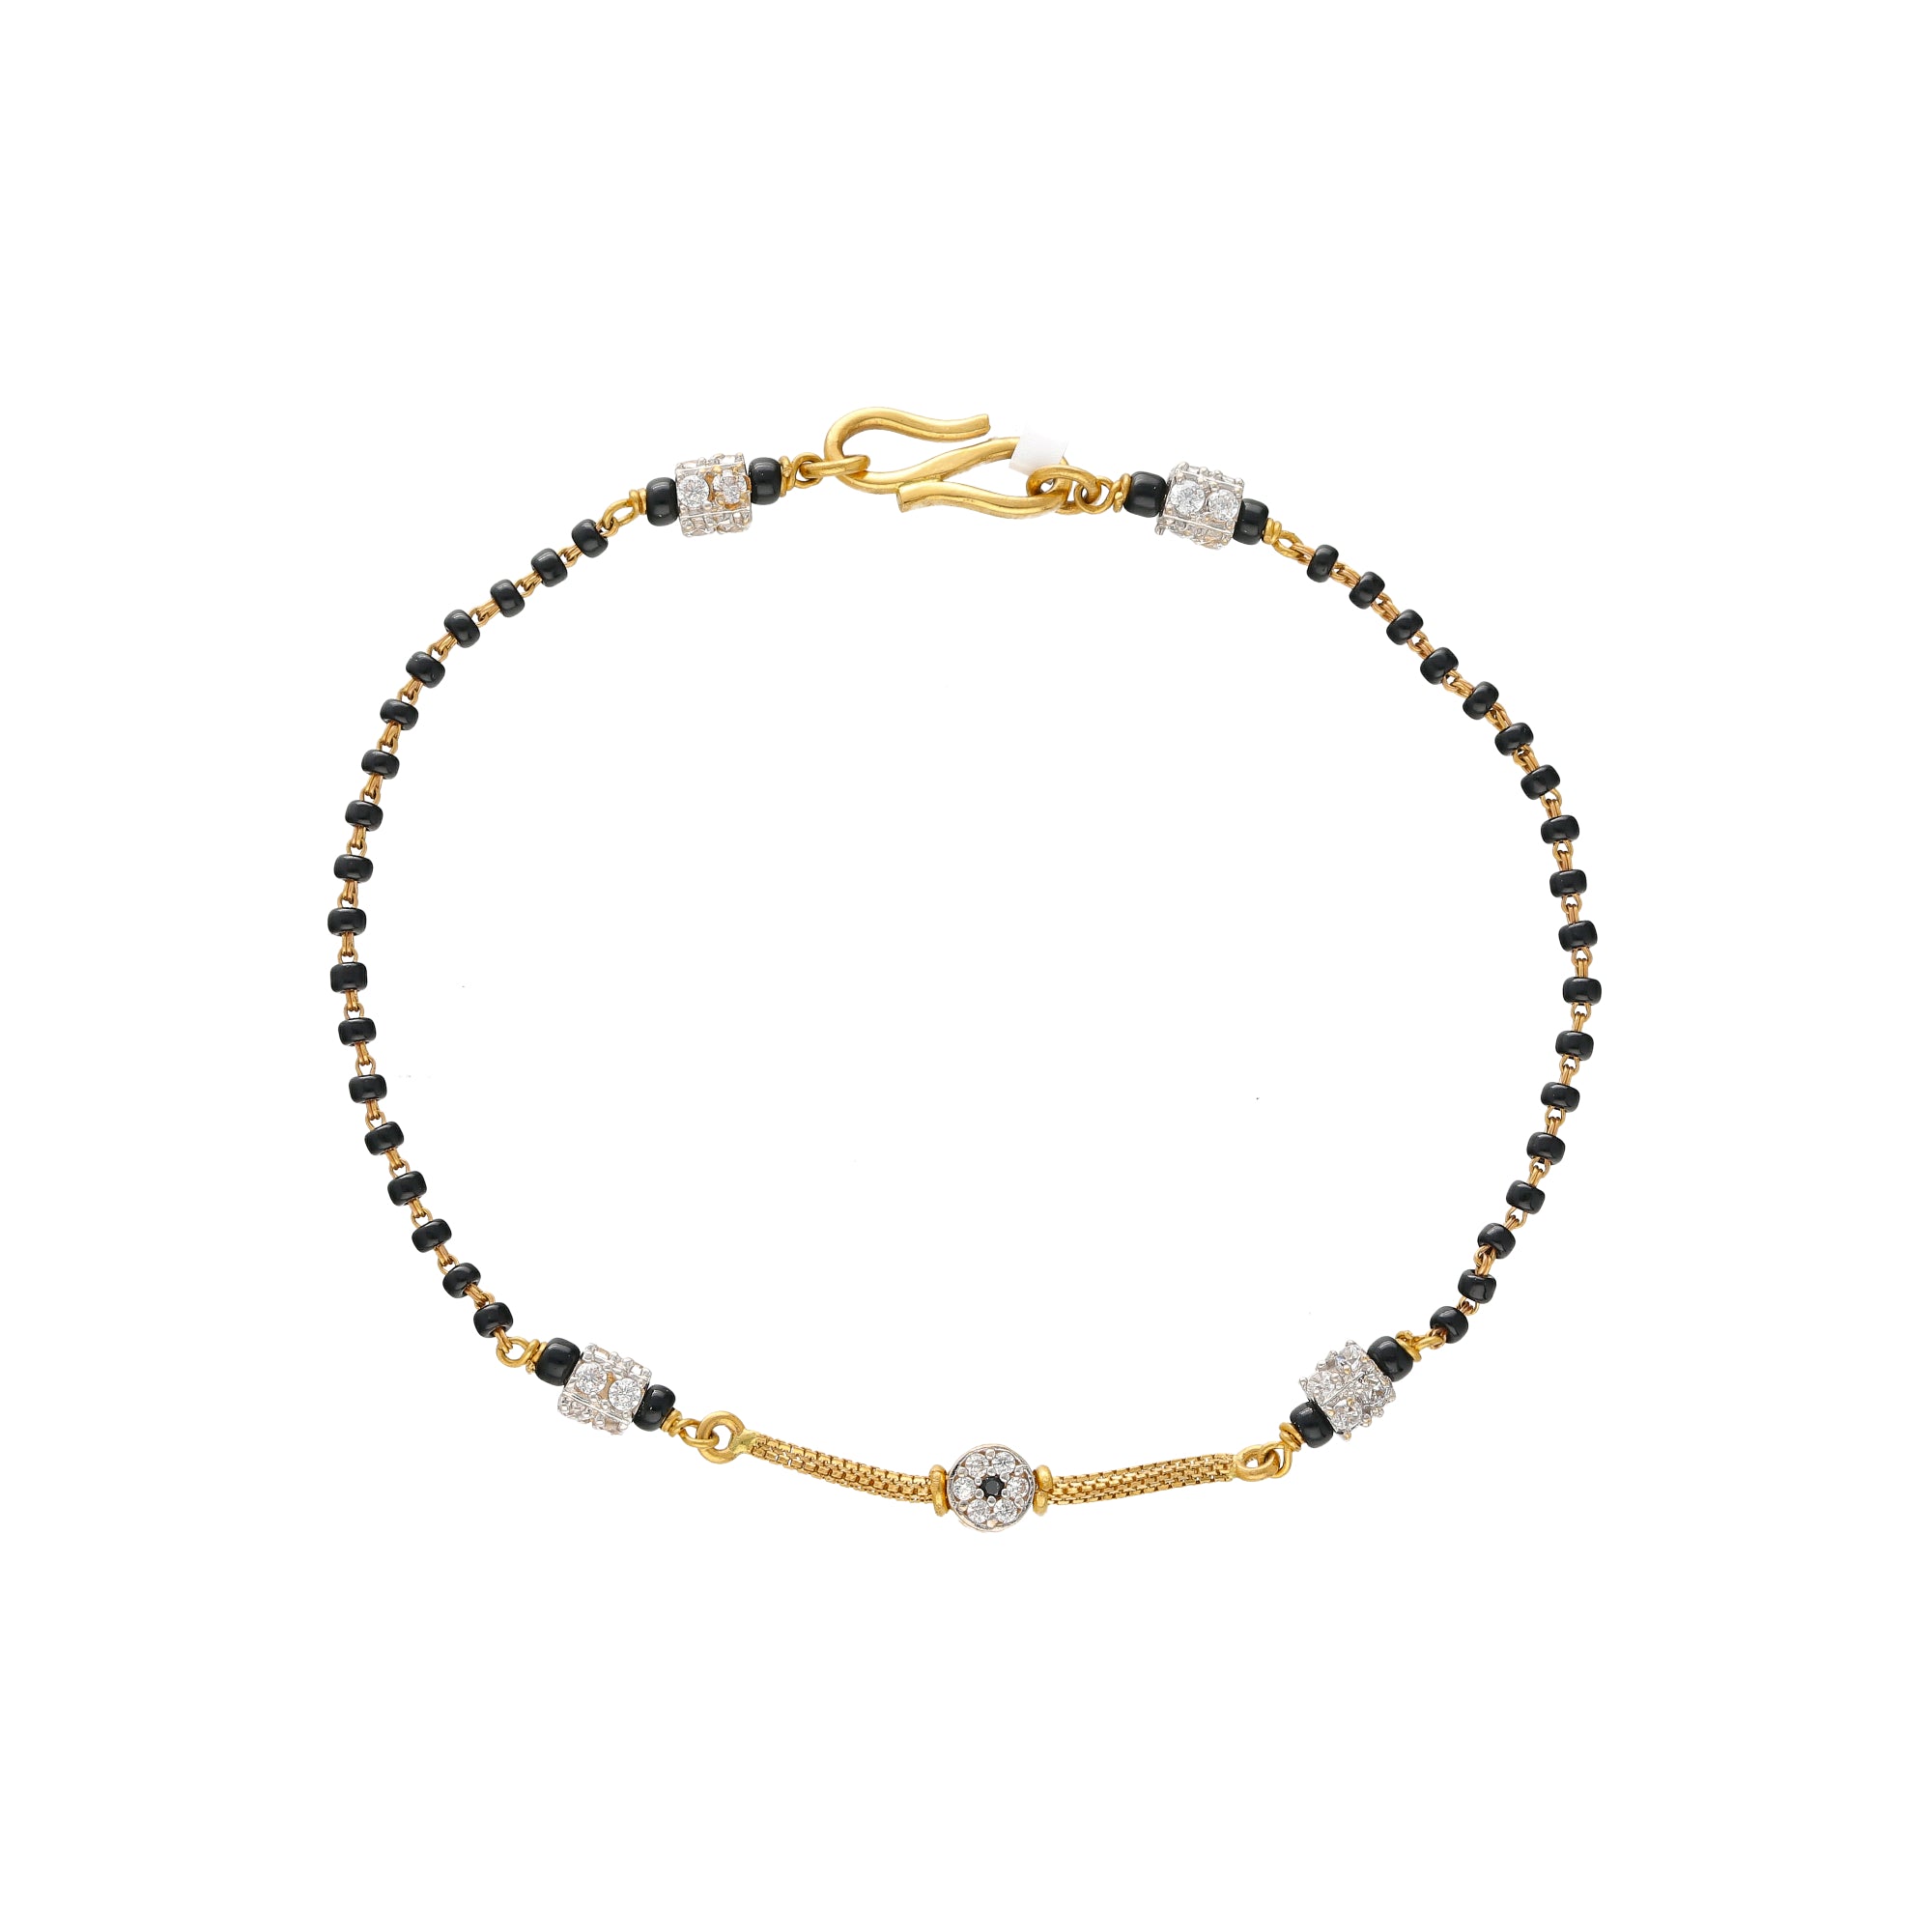 Buy quality Gold Light Weight Bracelet in Ahmedabad